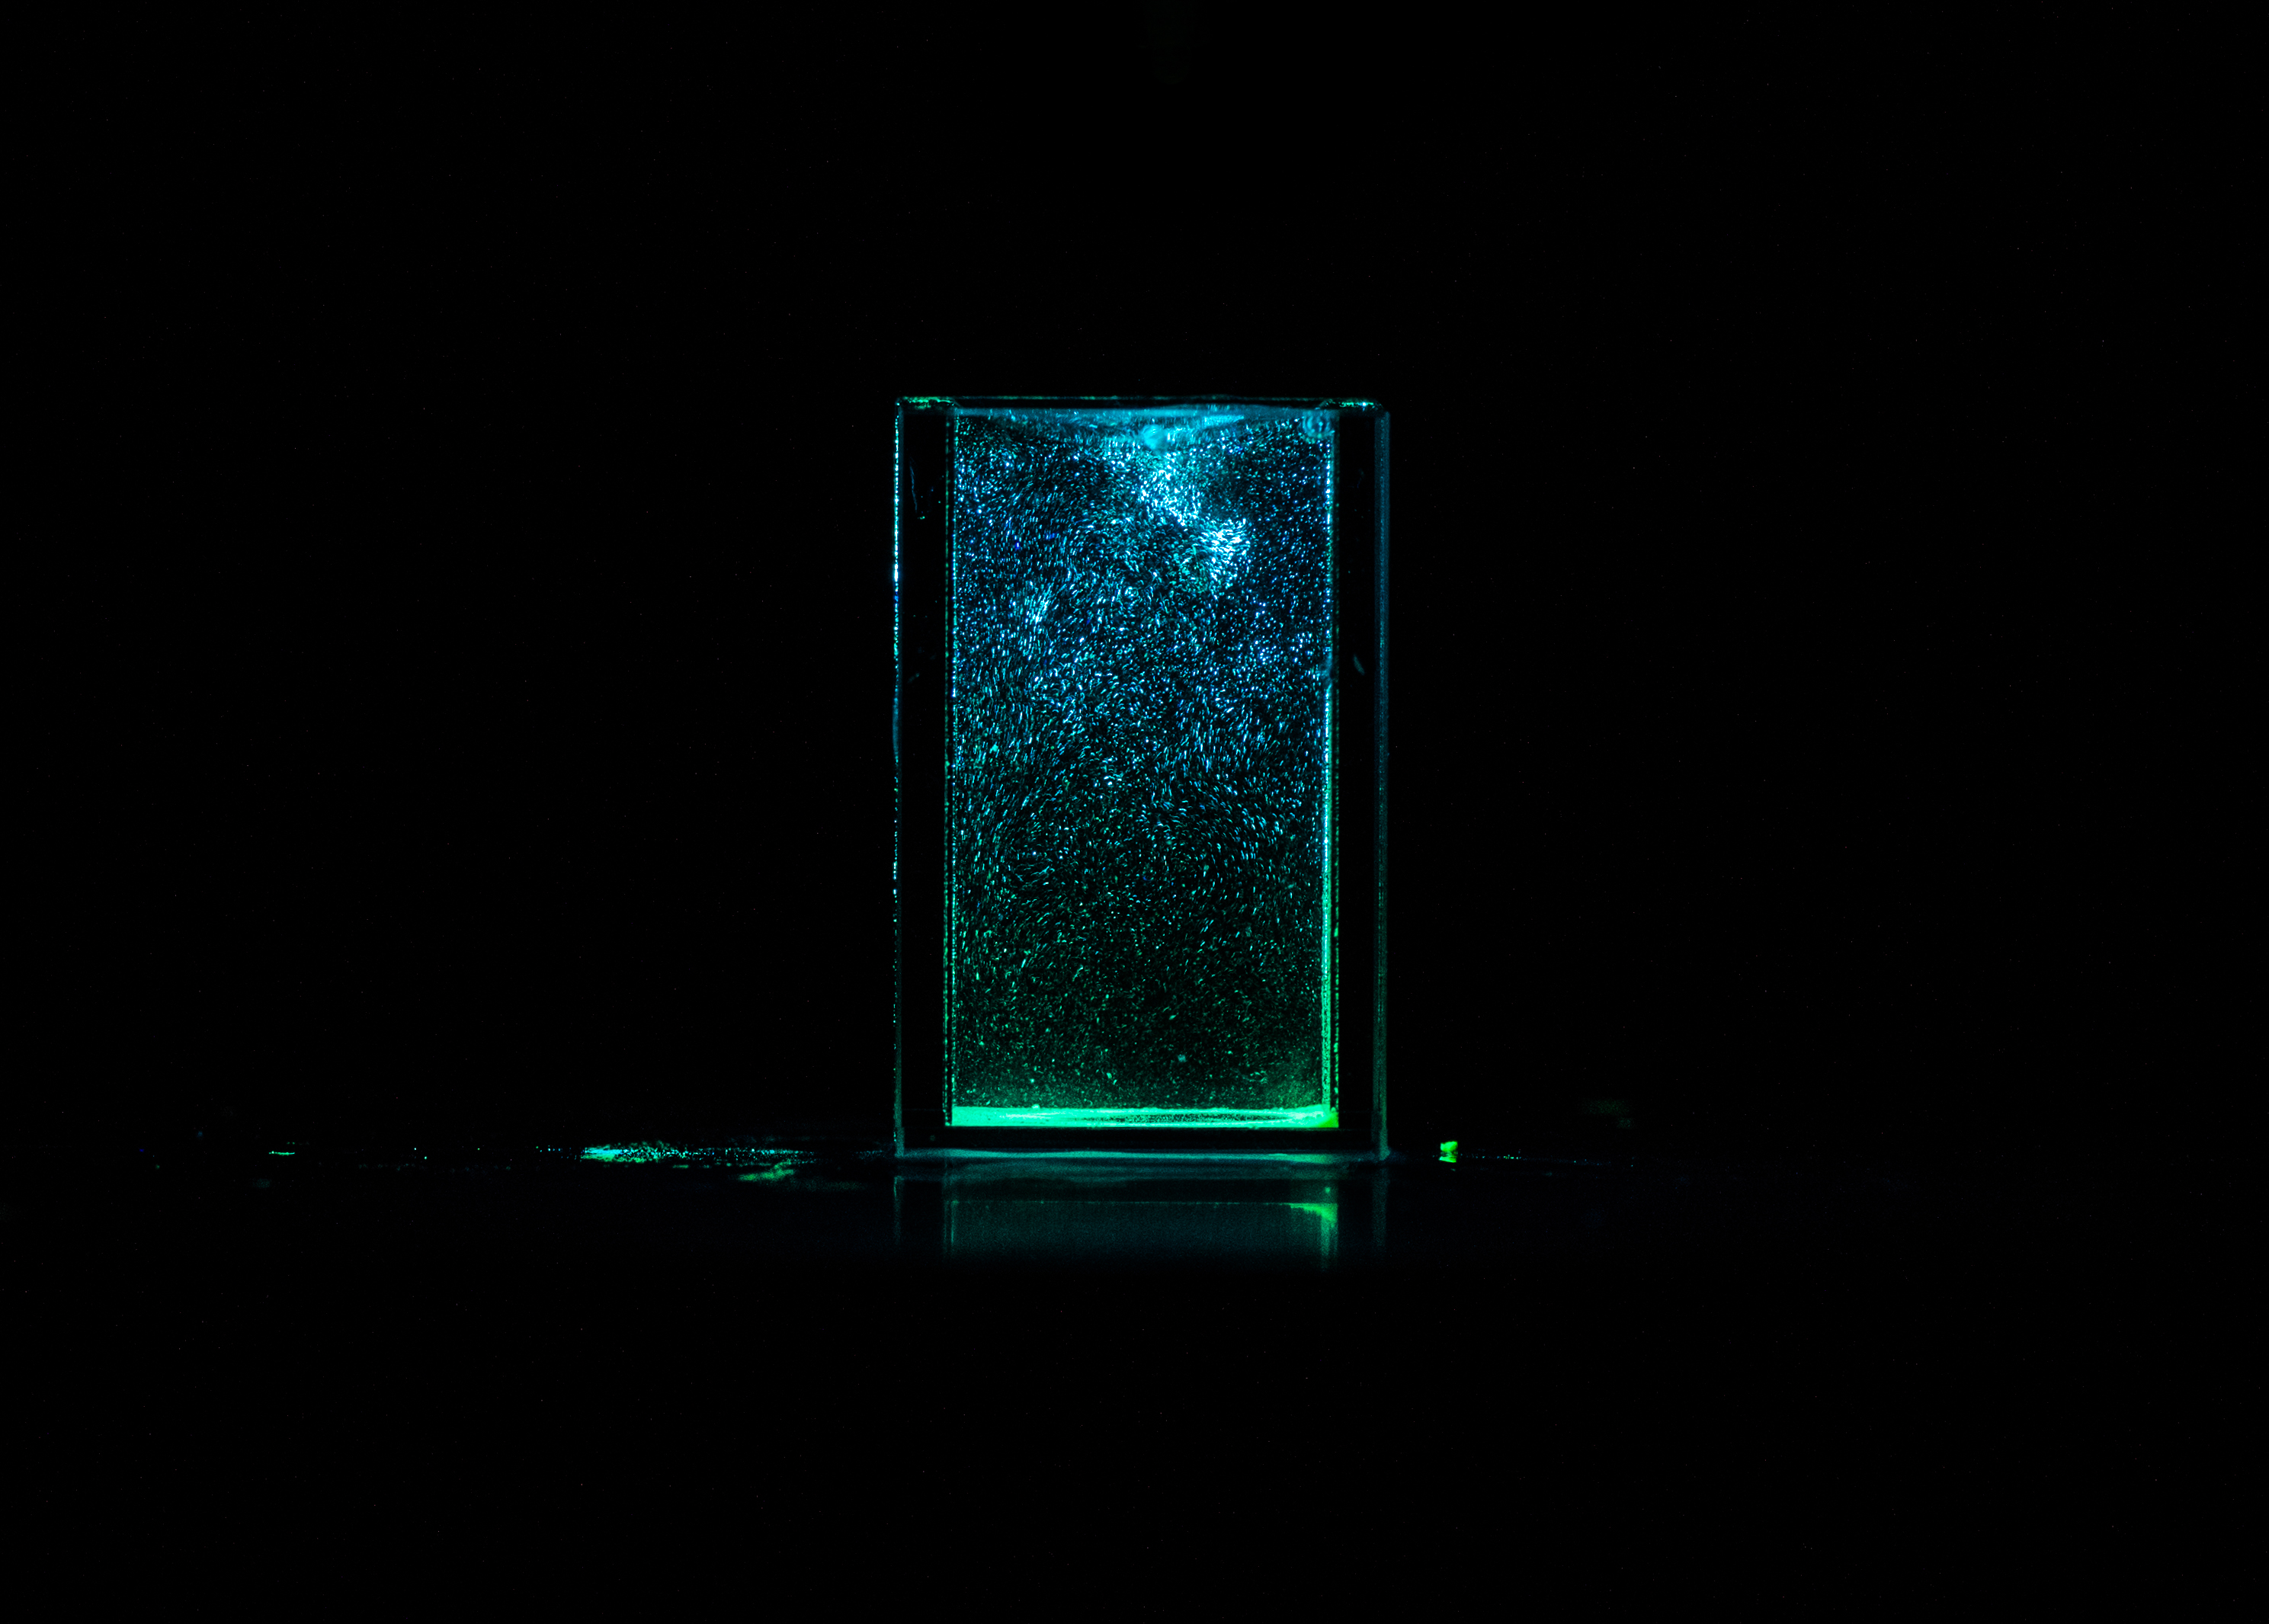 Hot suspension of temperature-sensitive phosphor particles was dripped into a cuvette half-filled with cold water. The cuvette was illuminate by a UV light sheet. The particles were cooling down due to the mixing process, and the emission spectrum shift from blue towards green. This emission property sheds light on a novel technique that can implement simultaneous temperature and velocity imaging in fluids. (Original photo; no enhancement.)